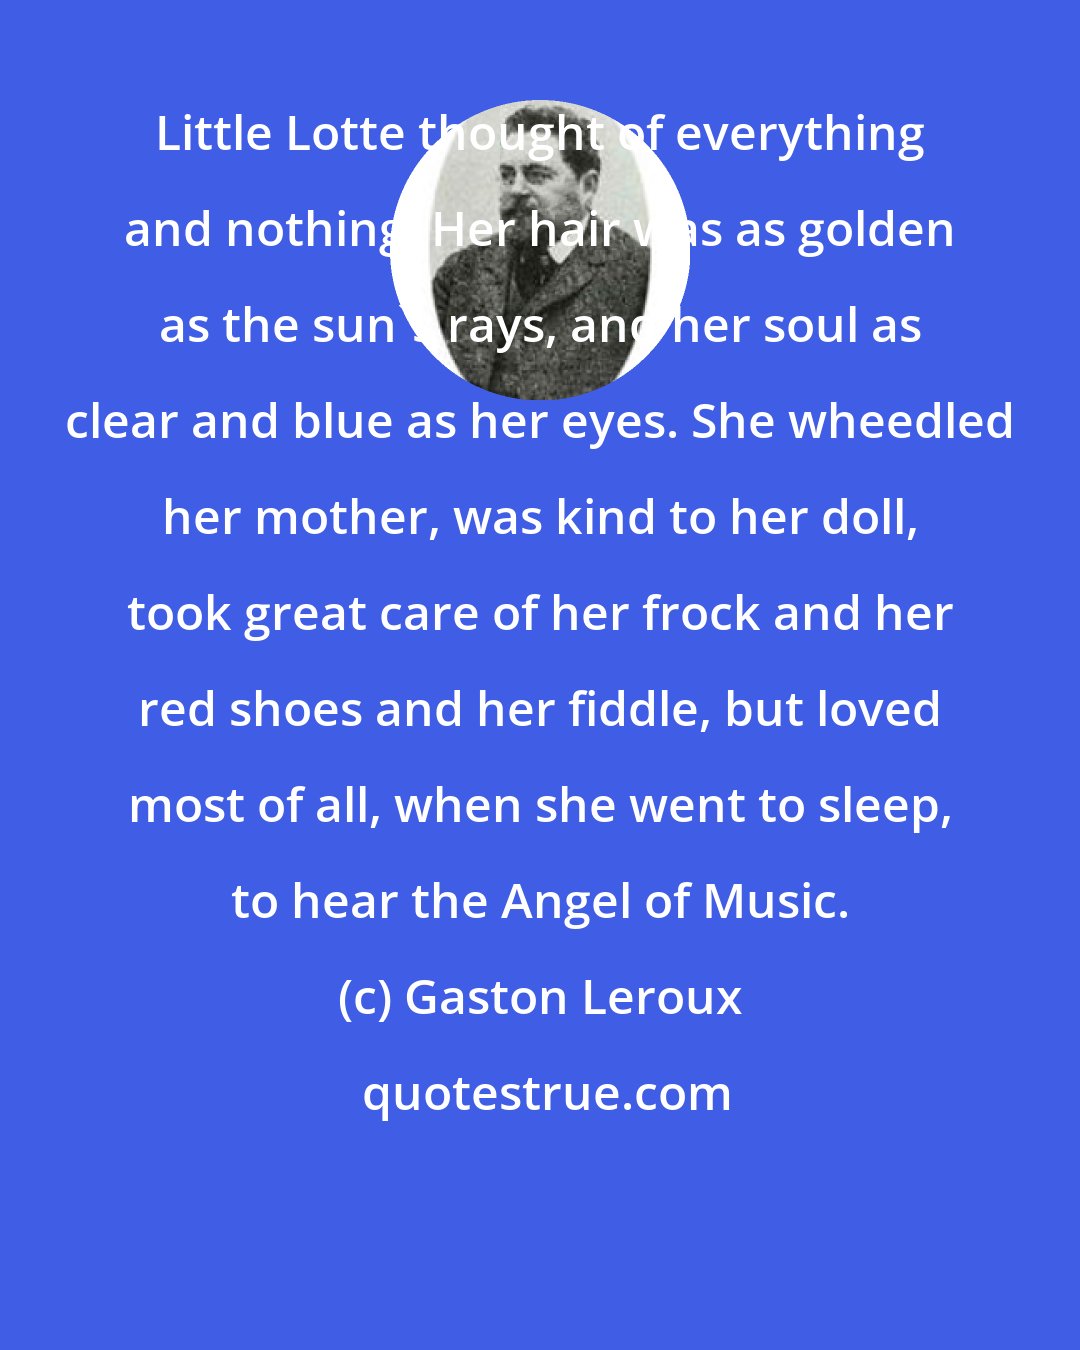 Gaston Leroux: Little Lotte thought of everything and nothing. Her hair was as golden as the sun's rays, and her soul as clear and blue as her eyes. She wheedled her mother, was kind to her doll, took great care of her frock and her red shoes and her fiddle, but loved most of all, when she went to sleep, to hear the Angel of Music.